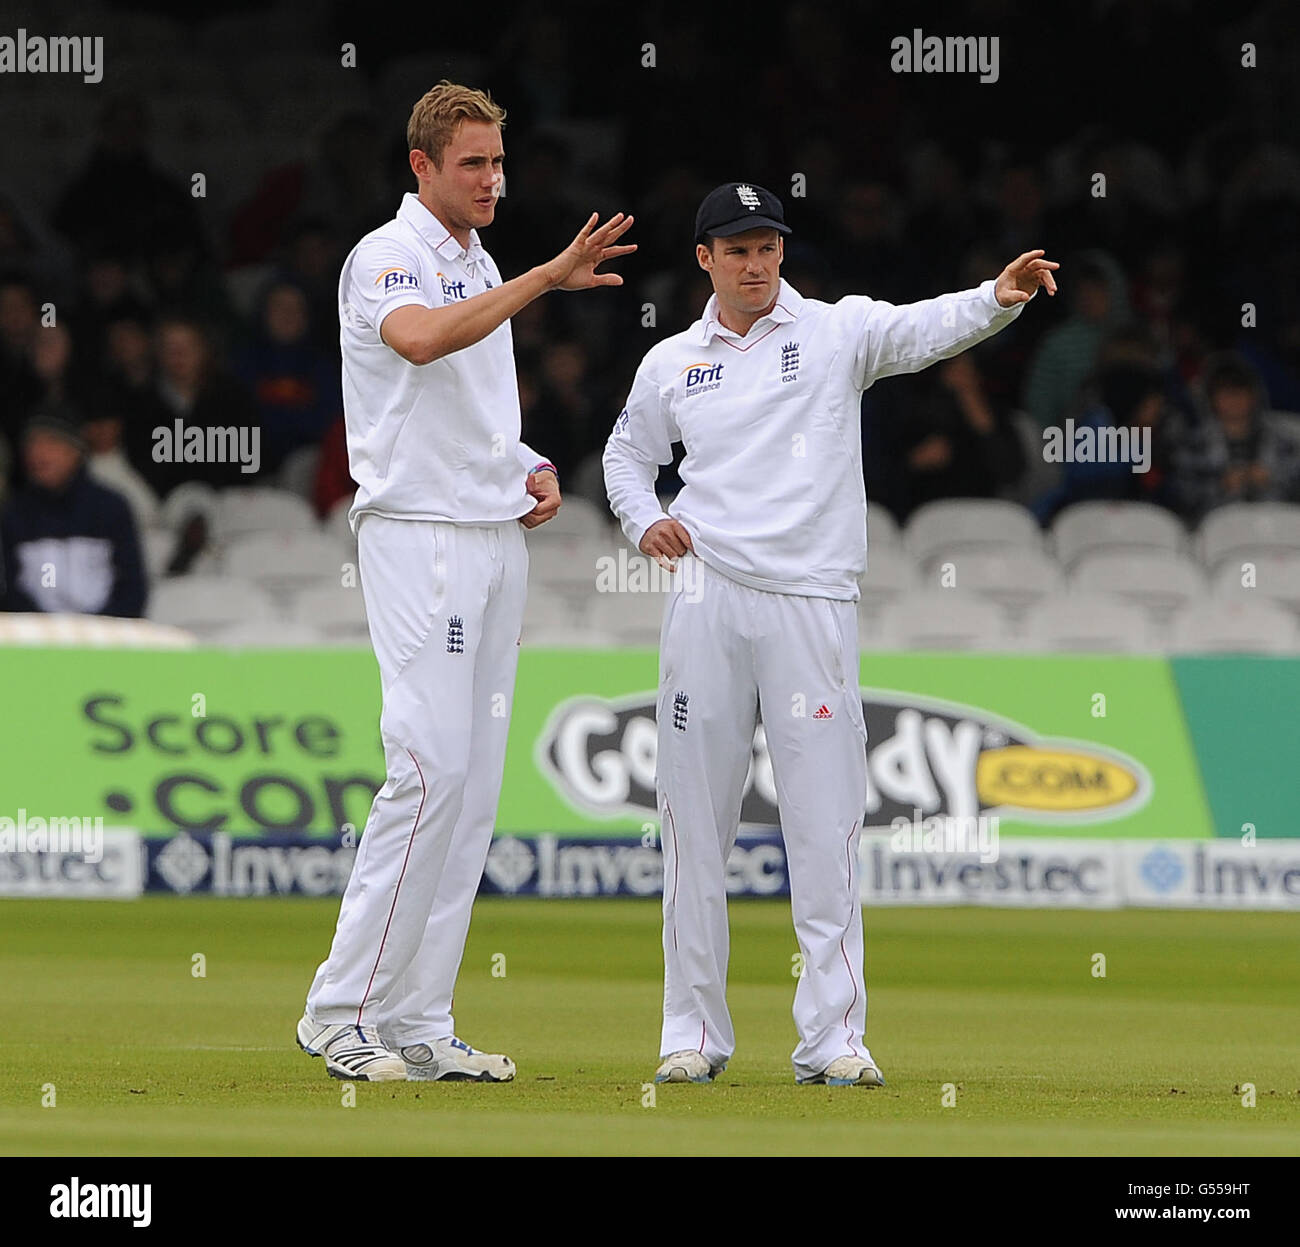 Cricket - 2012 Investec Test Series - England v West Indies - First Test - Day Four - Lord's Cricket Ground. England's Stuart Broad (left) discusses field placings against the West Indies with Captain Andrew Strauss. Stock Photo